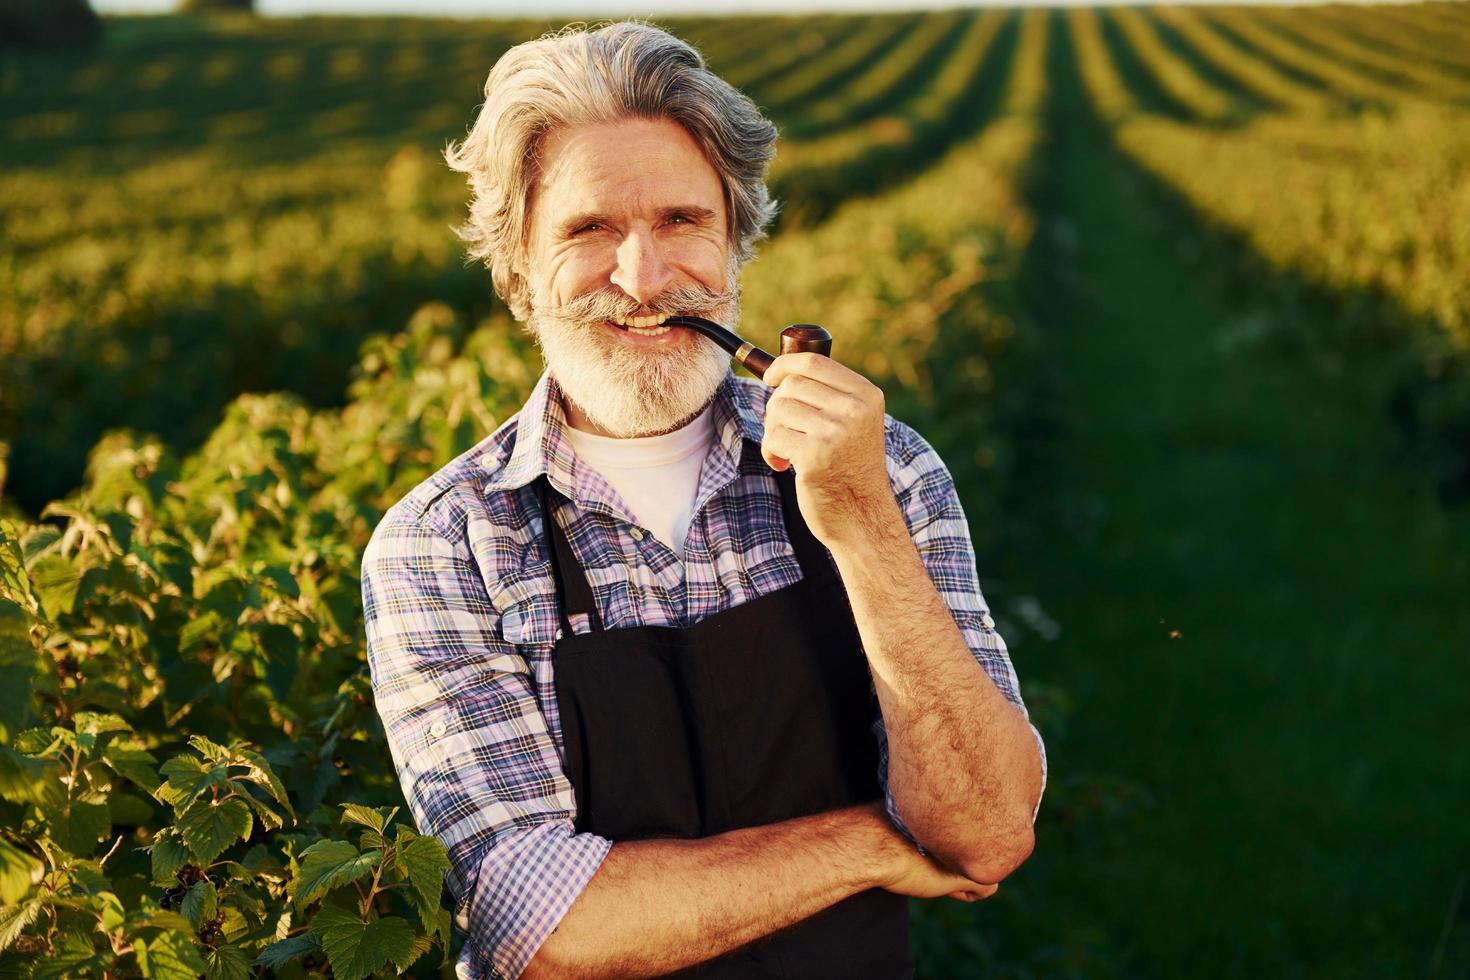 Standing and smoking. Senior stylish man with grey hair and beard on the agricultural field with harvest photo